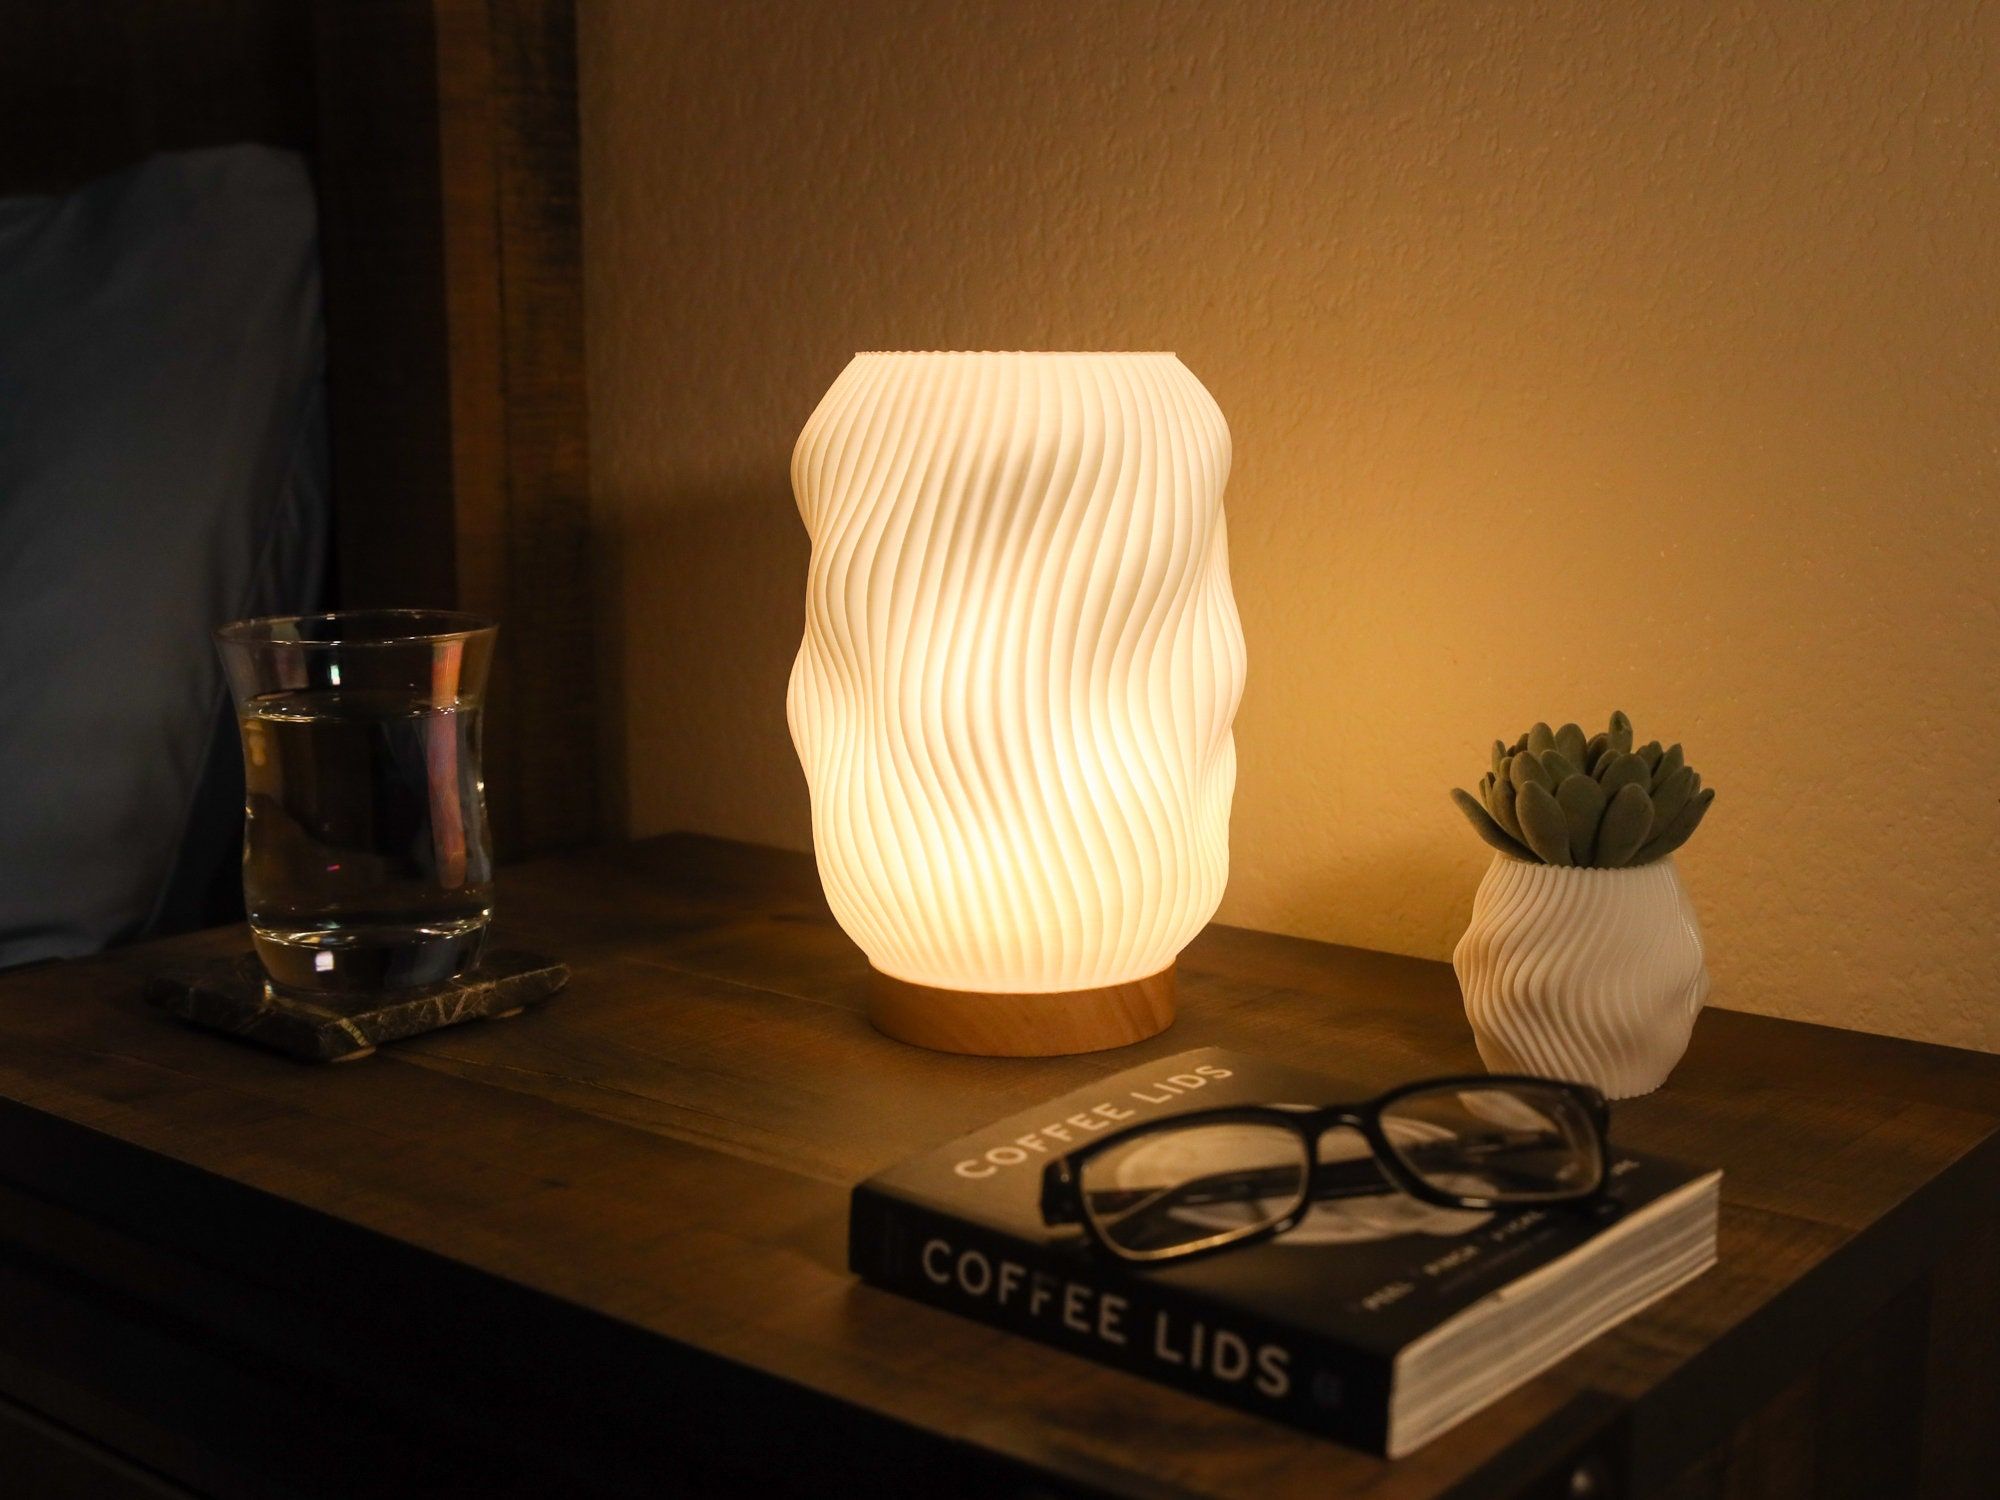 Desk Lamps Illuminate Your Work Space With These Stylish Lighting Options